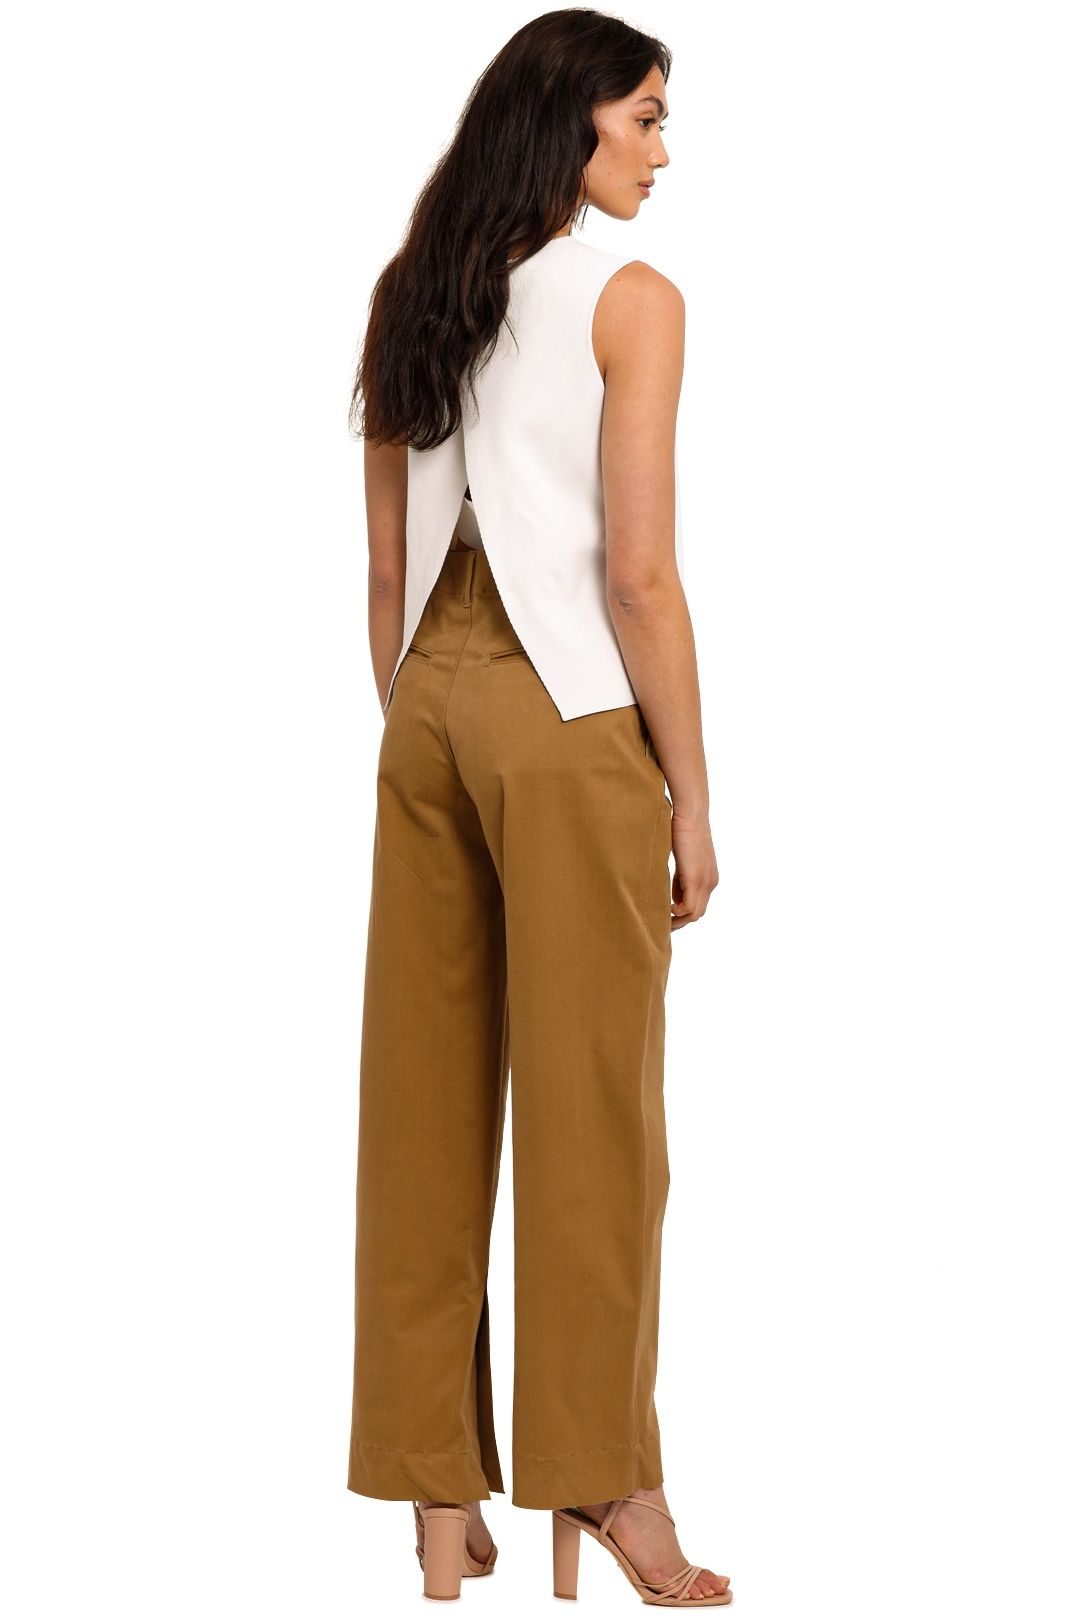 Bassike Brushed Twill Slouch Chino tan